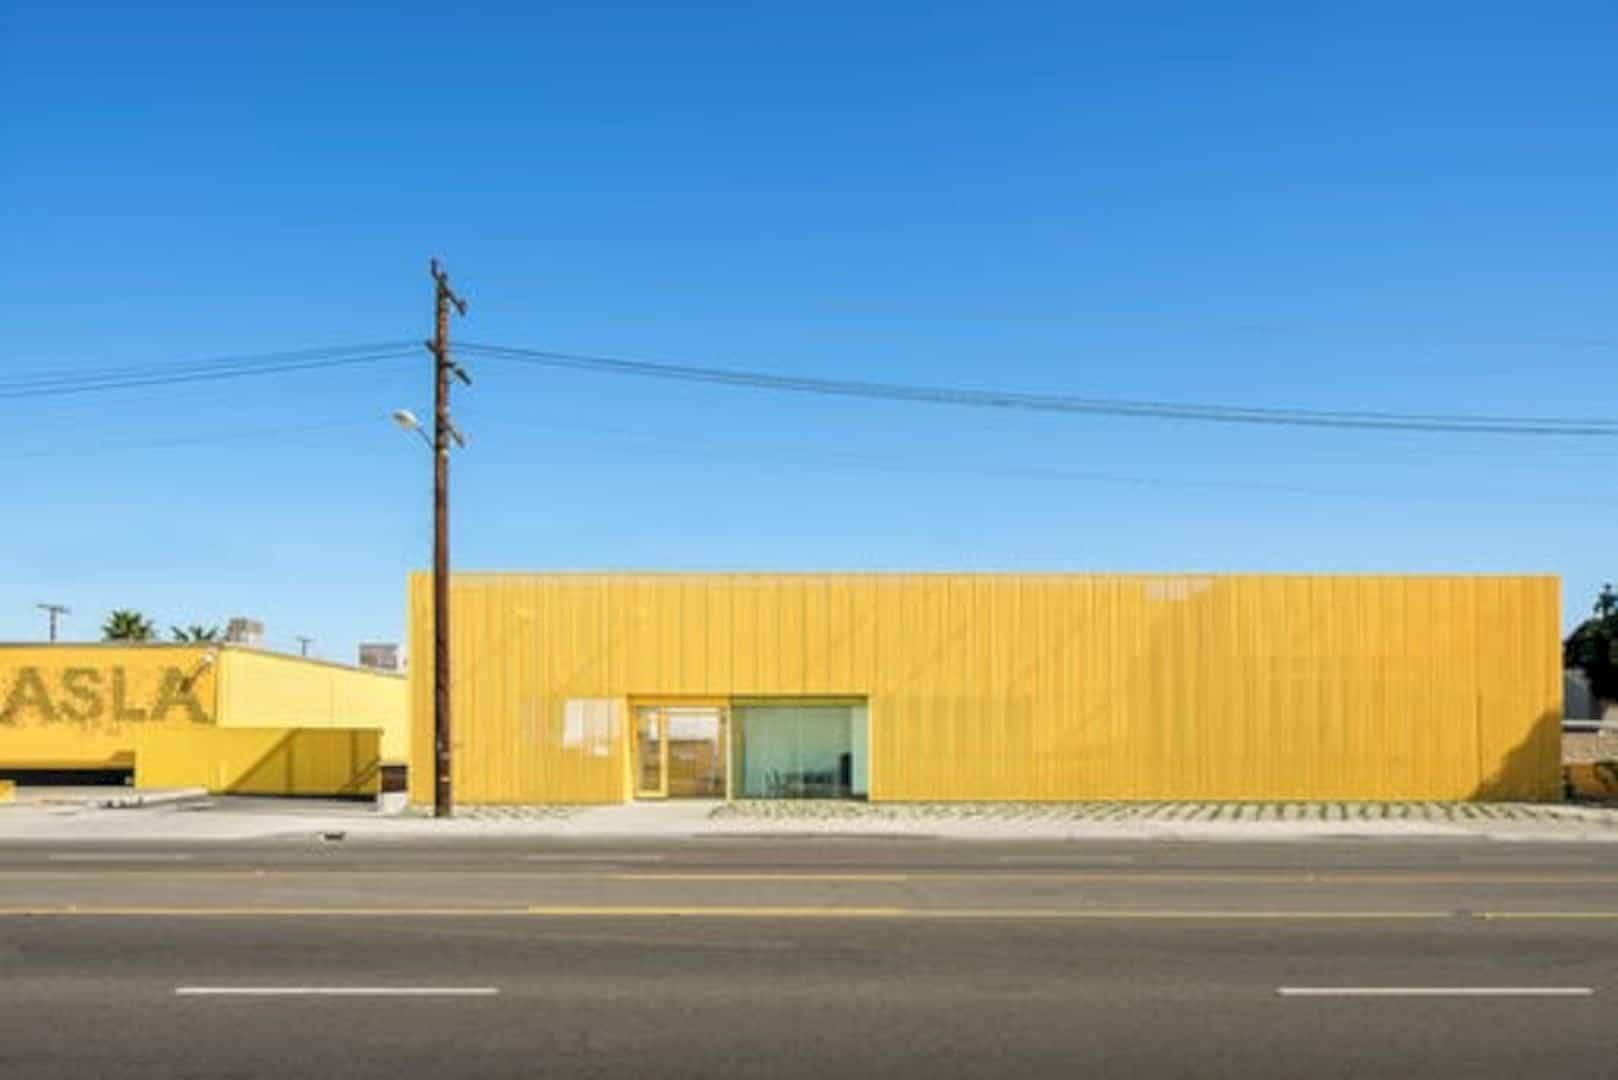 Animo South Los Angeles High School A Bright Yellow Campus Building In Sunny La Atmosphere 11